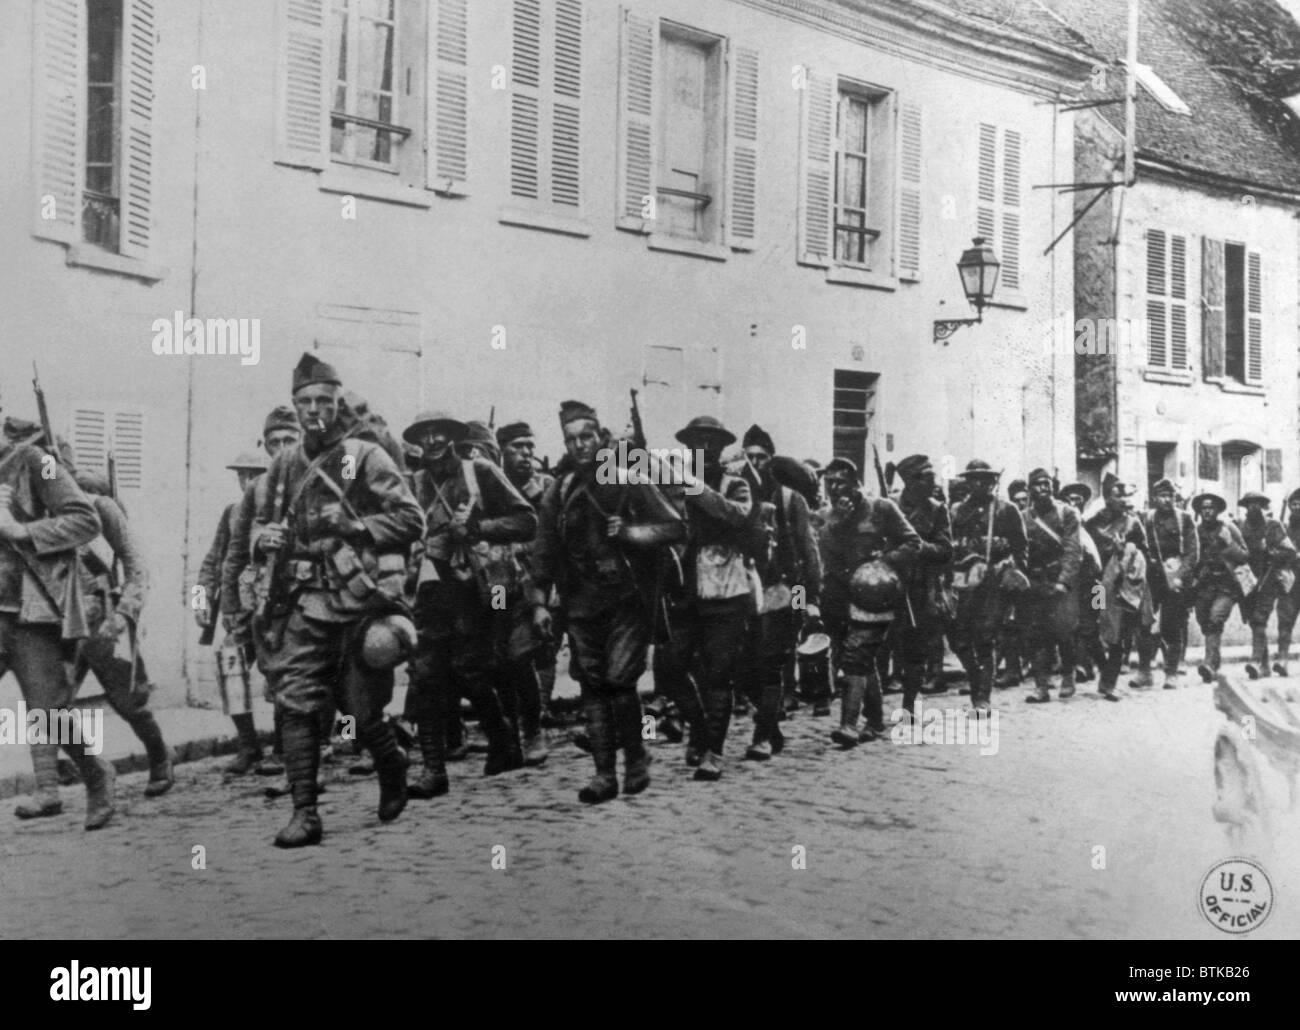 World War I, American troops of the 166th Infantry, 42nd Division, entering La Ferte-sous-Jouarre, France, U.S. Signal Corps photograph, 1918 Stock Photo